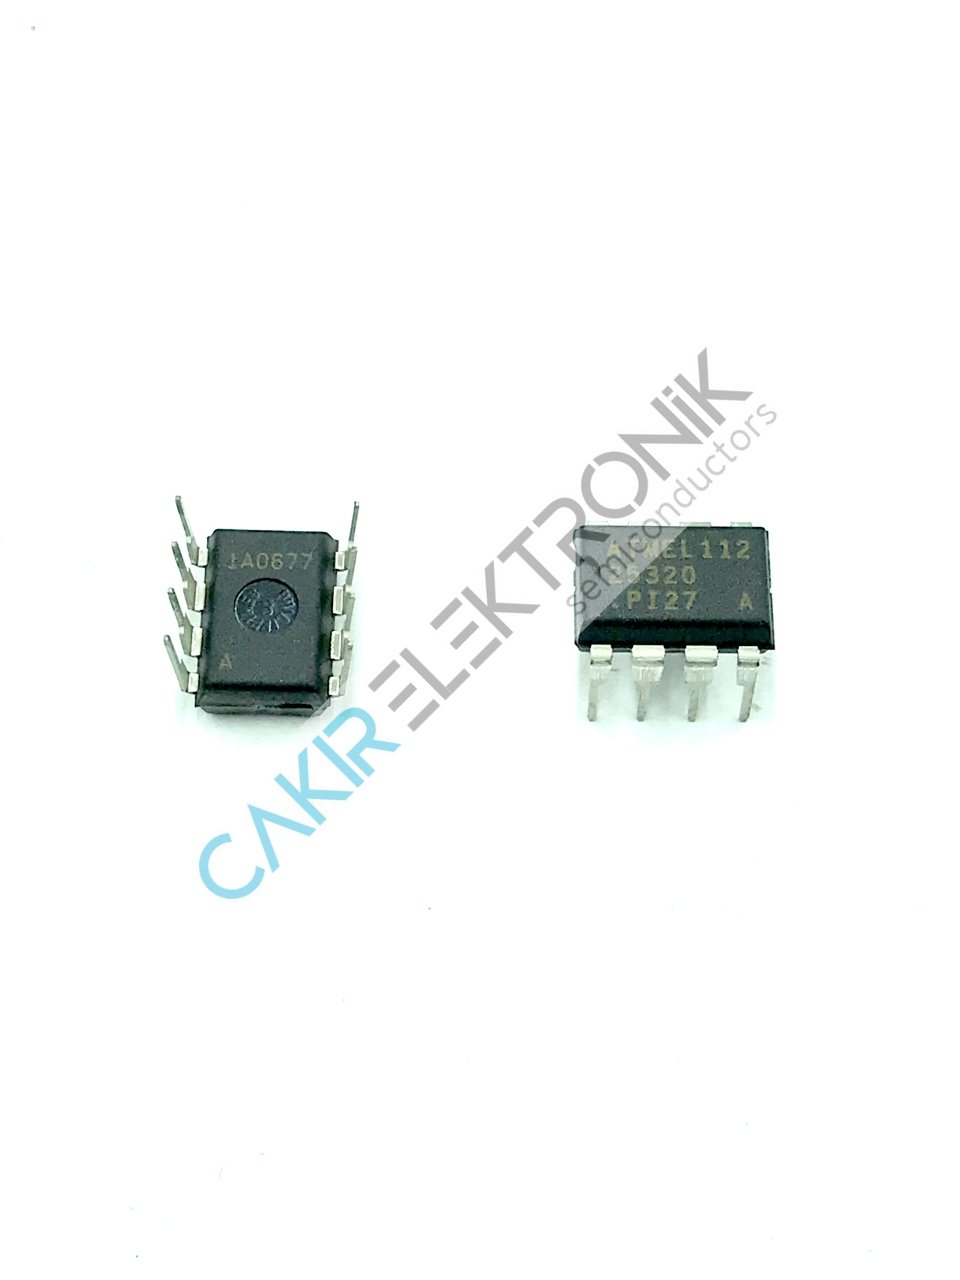 AT25320 -   ATMEL 25320A -   SPI Serial EEPROM 32Kb (4096 x 8) and 64Kb (8192 x 8)